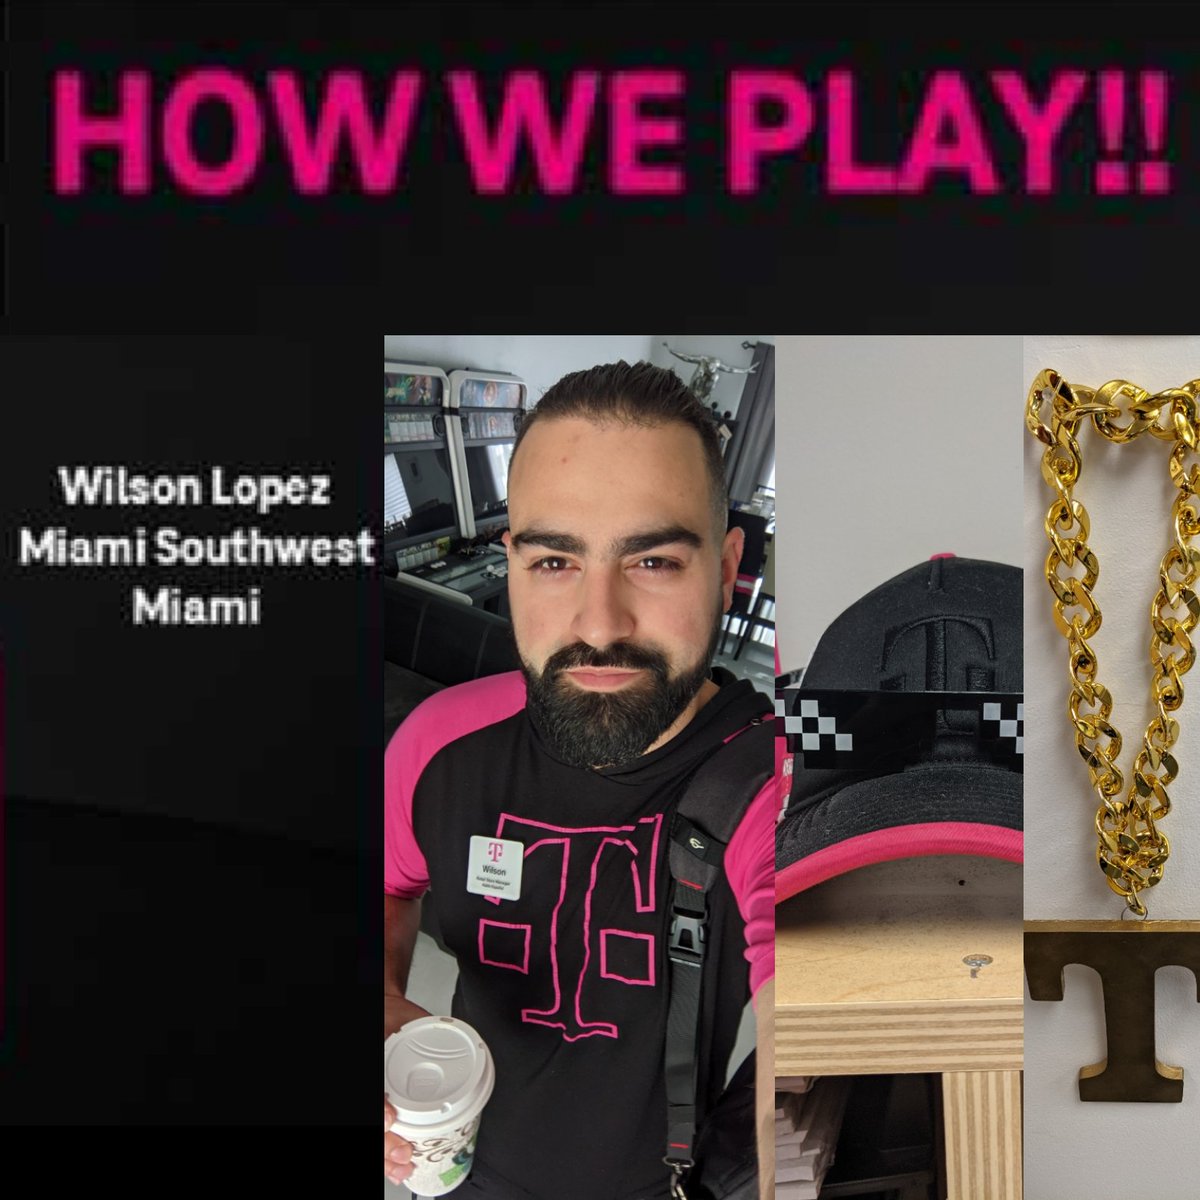 Extremely Honored to be recognized as the 'How we Play' Champion for Miami in May 2021. Proud to represent and work with an amazing group of peers and leaders! #MiamiSouthwest #MiamiSpartans @DGaulhiac @pattyc101 @AnnieG_FL